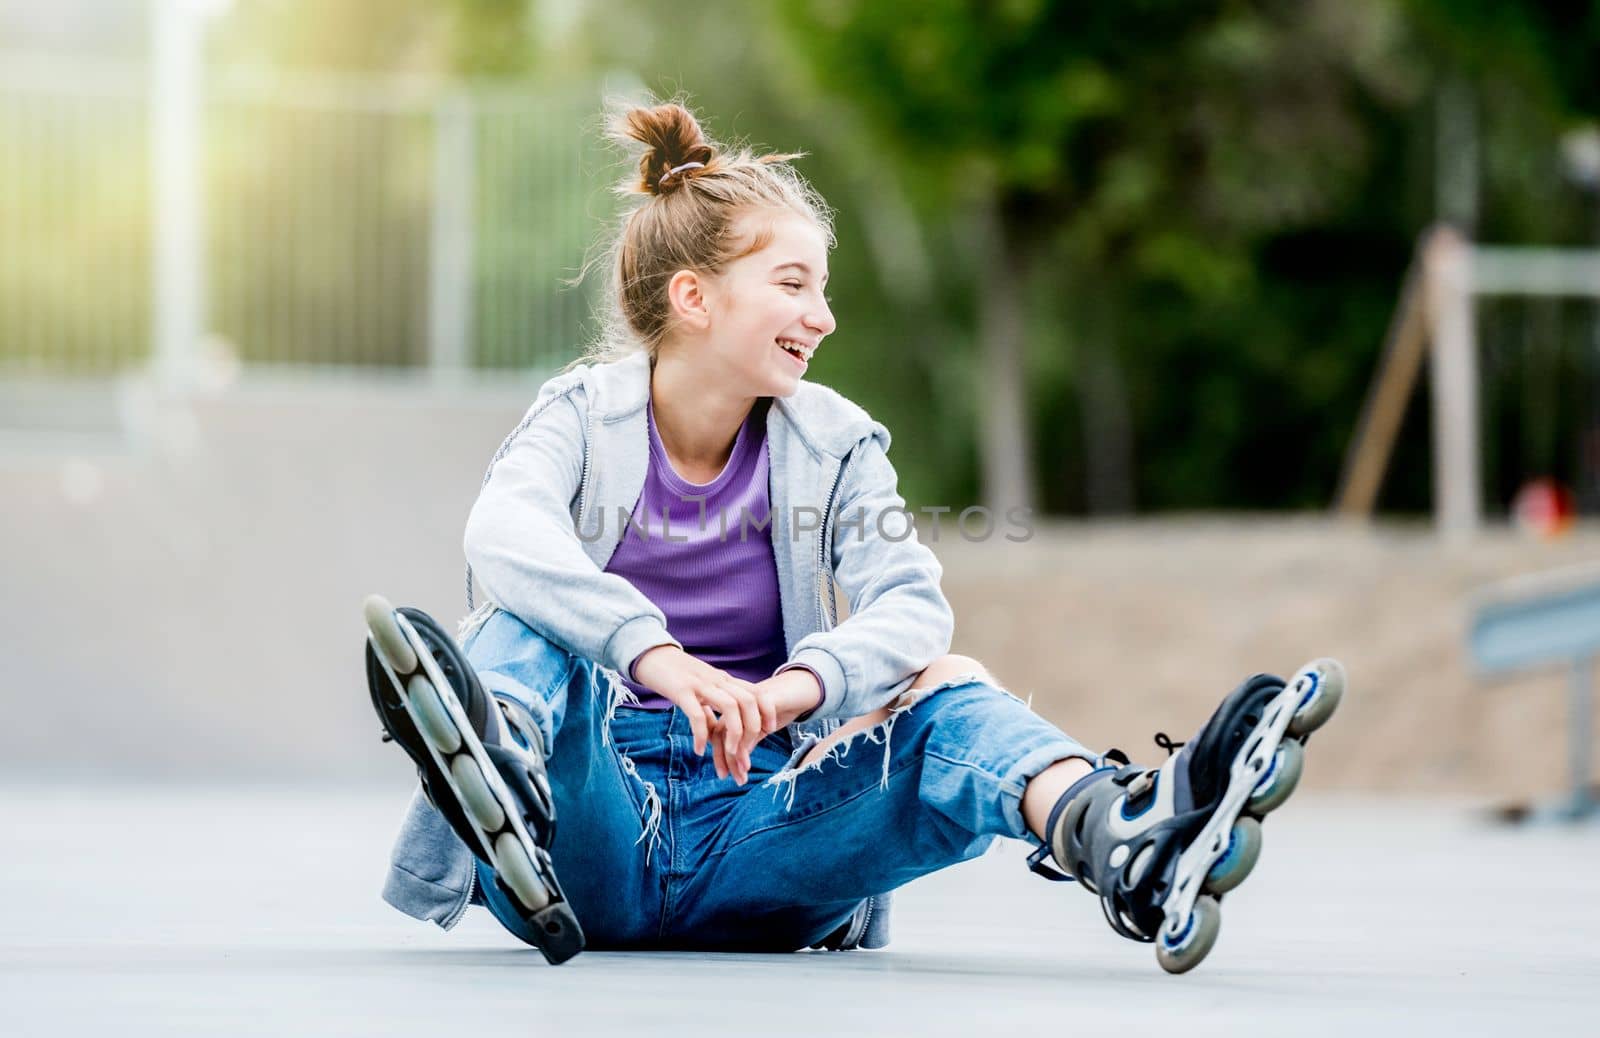 Cute girl roller skater sitting on ground in city park and smiling. Pretty female teenager with hairstyle posing during rollerskating